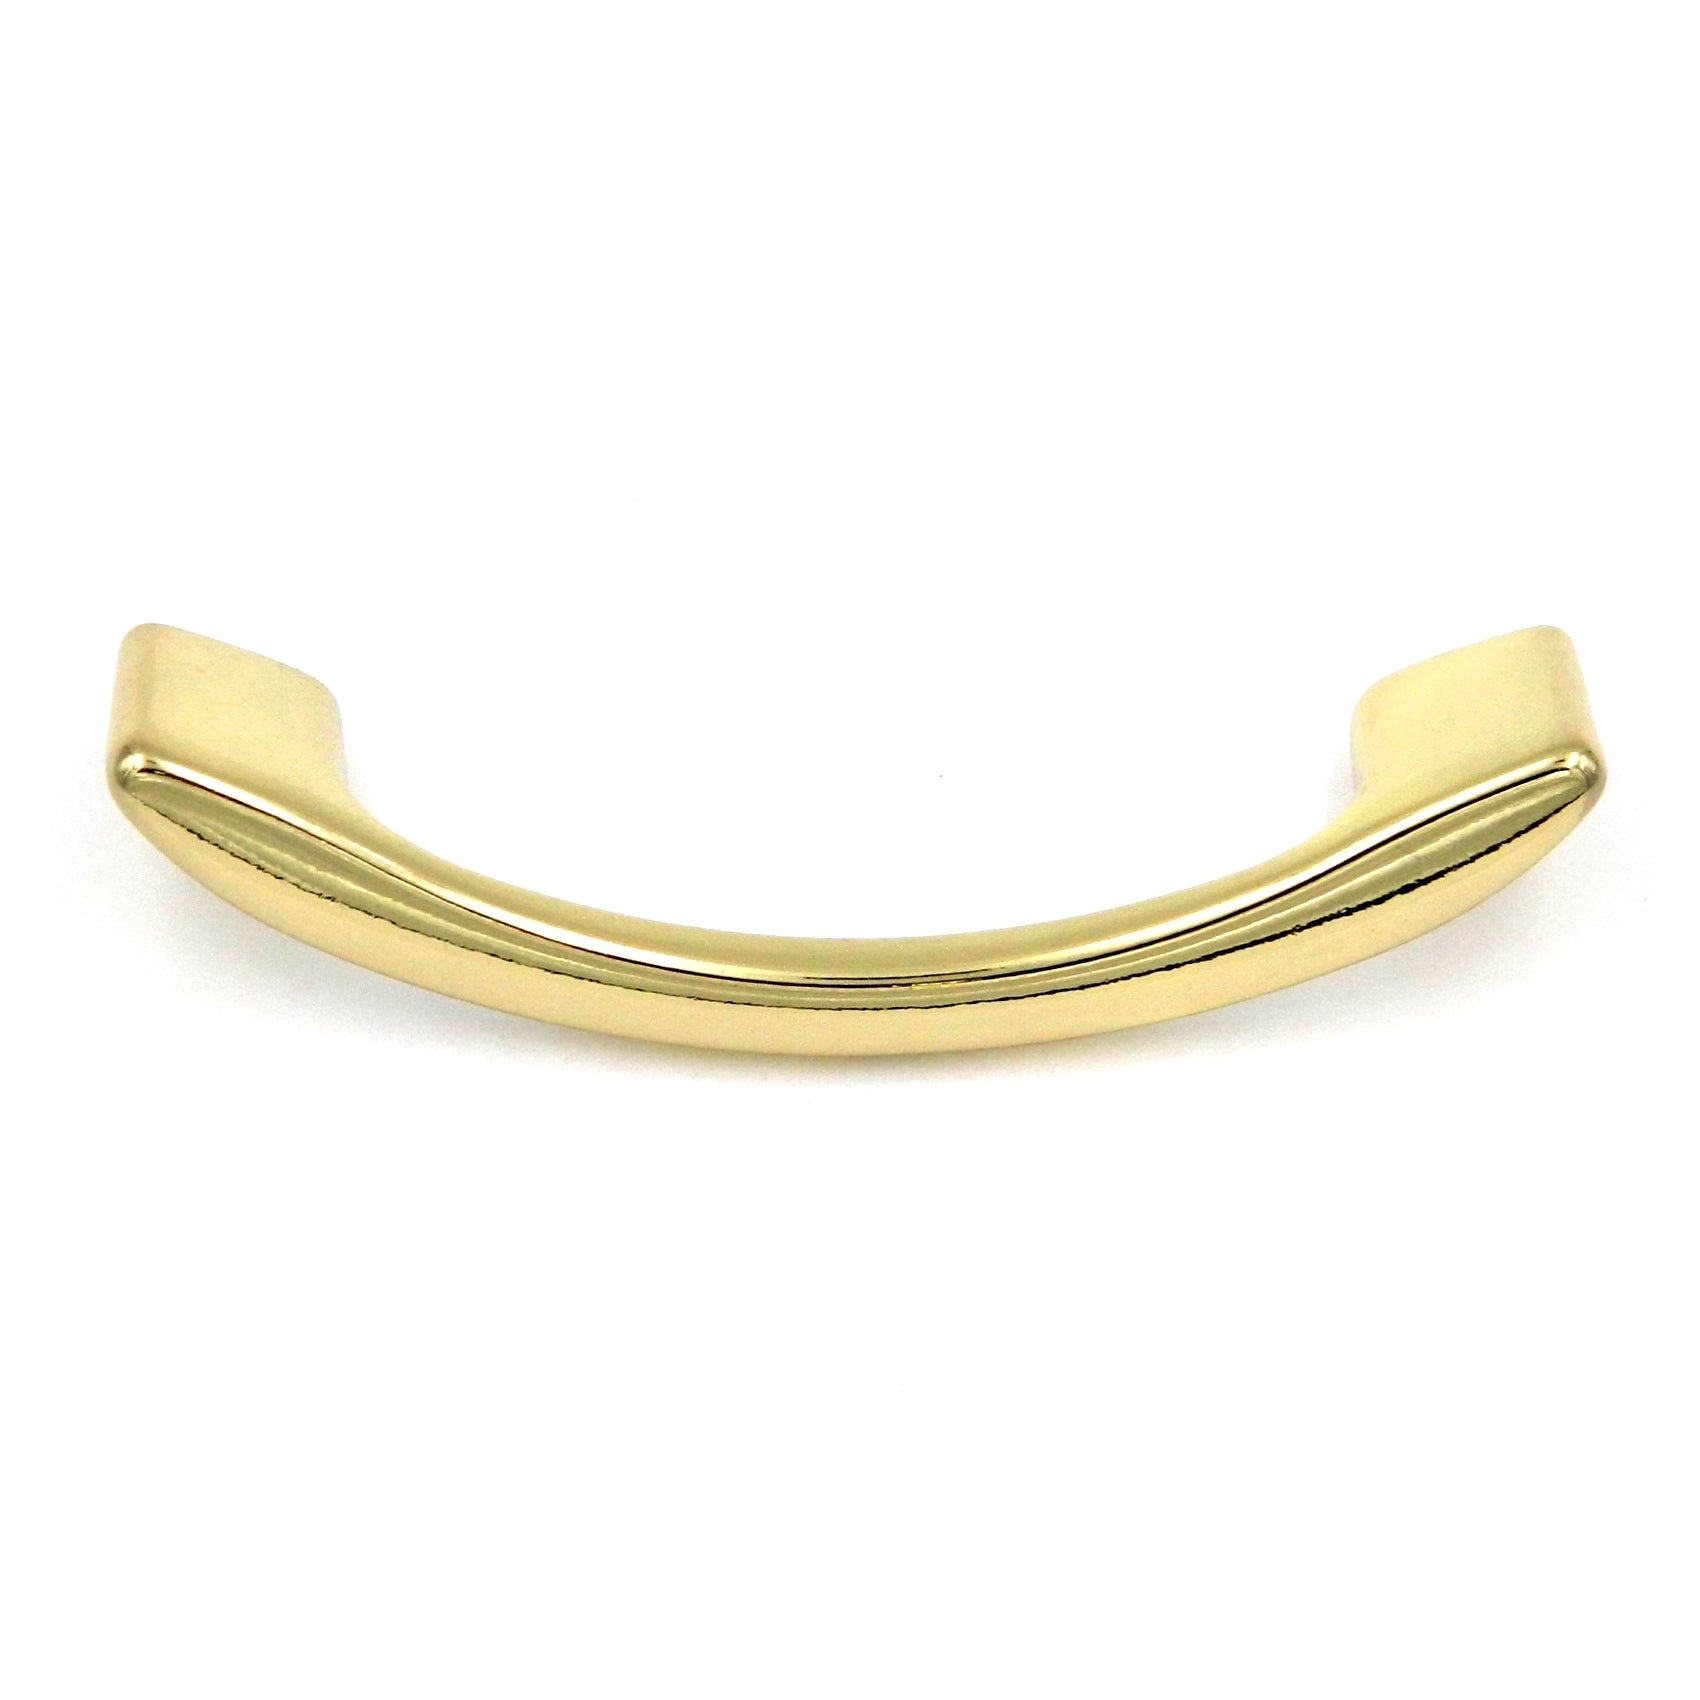 Hickory Hardware P14415-3 Sunnyside Curved 3" Polished Brass Arch Cabinet Handle Pull